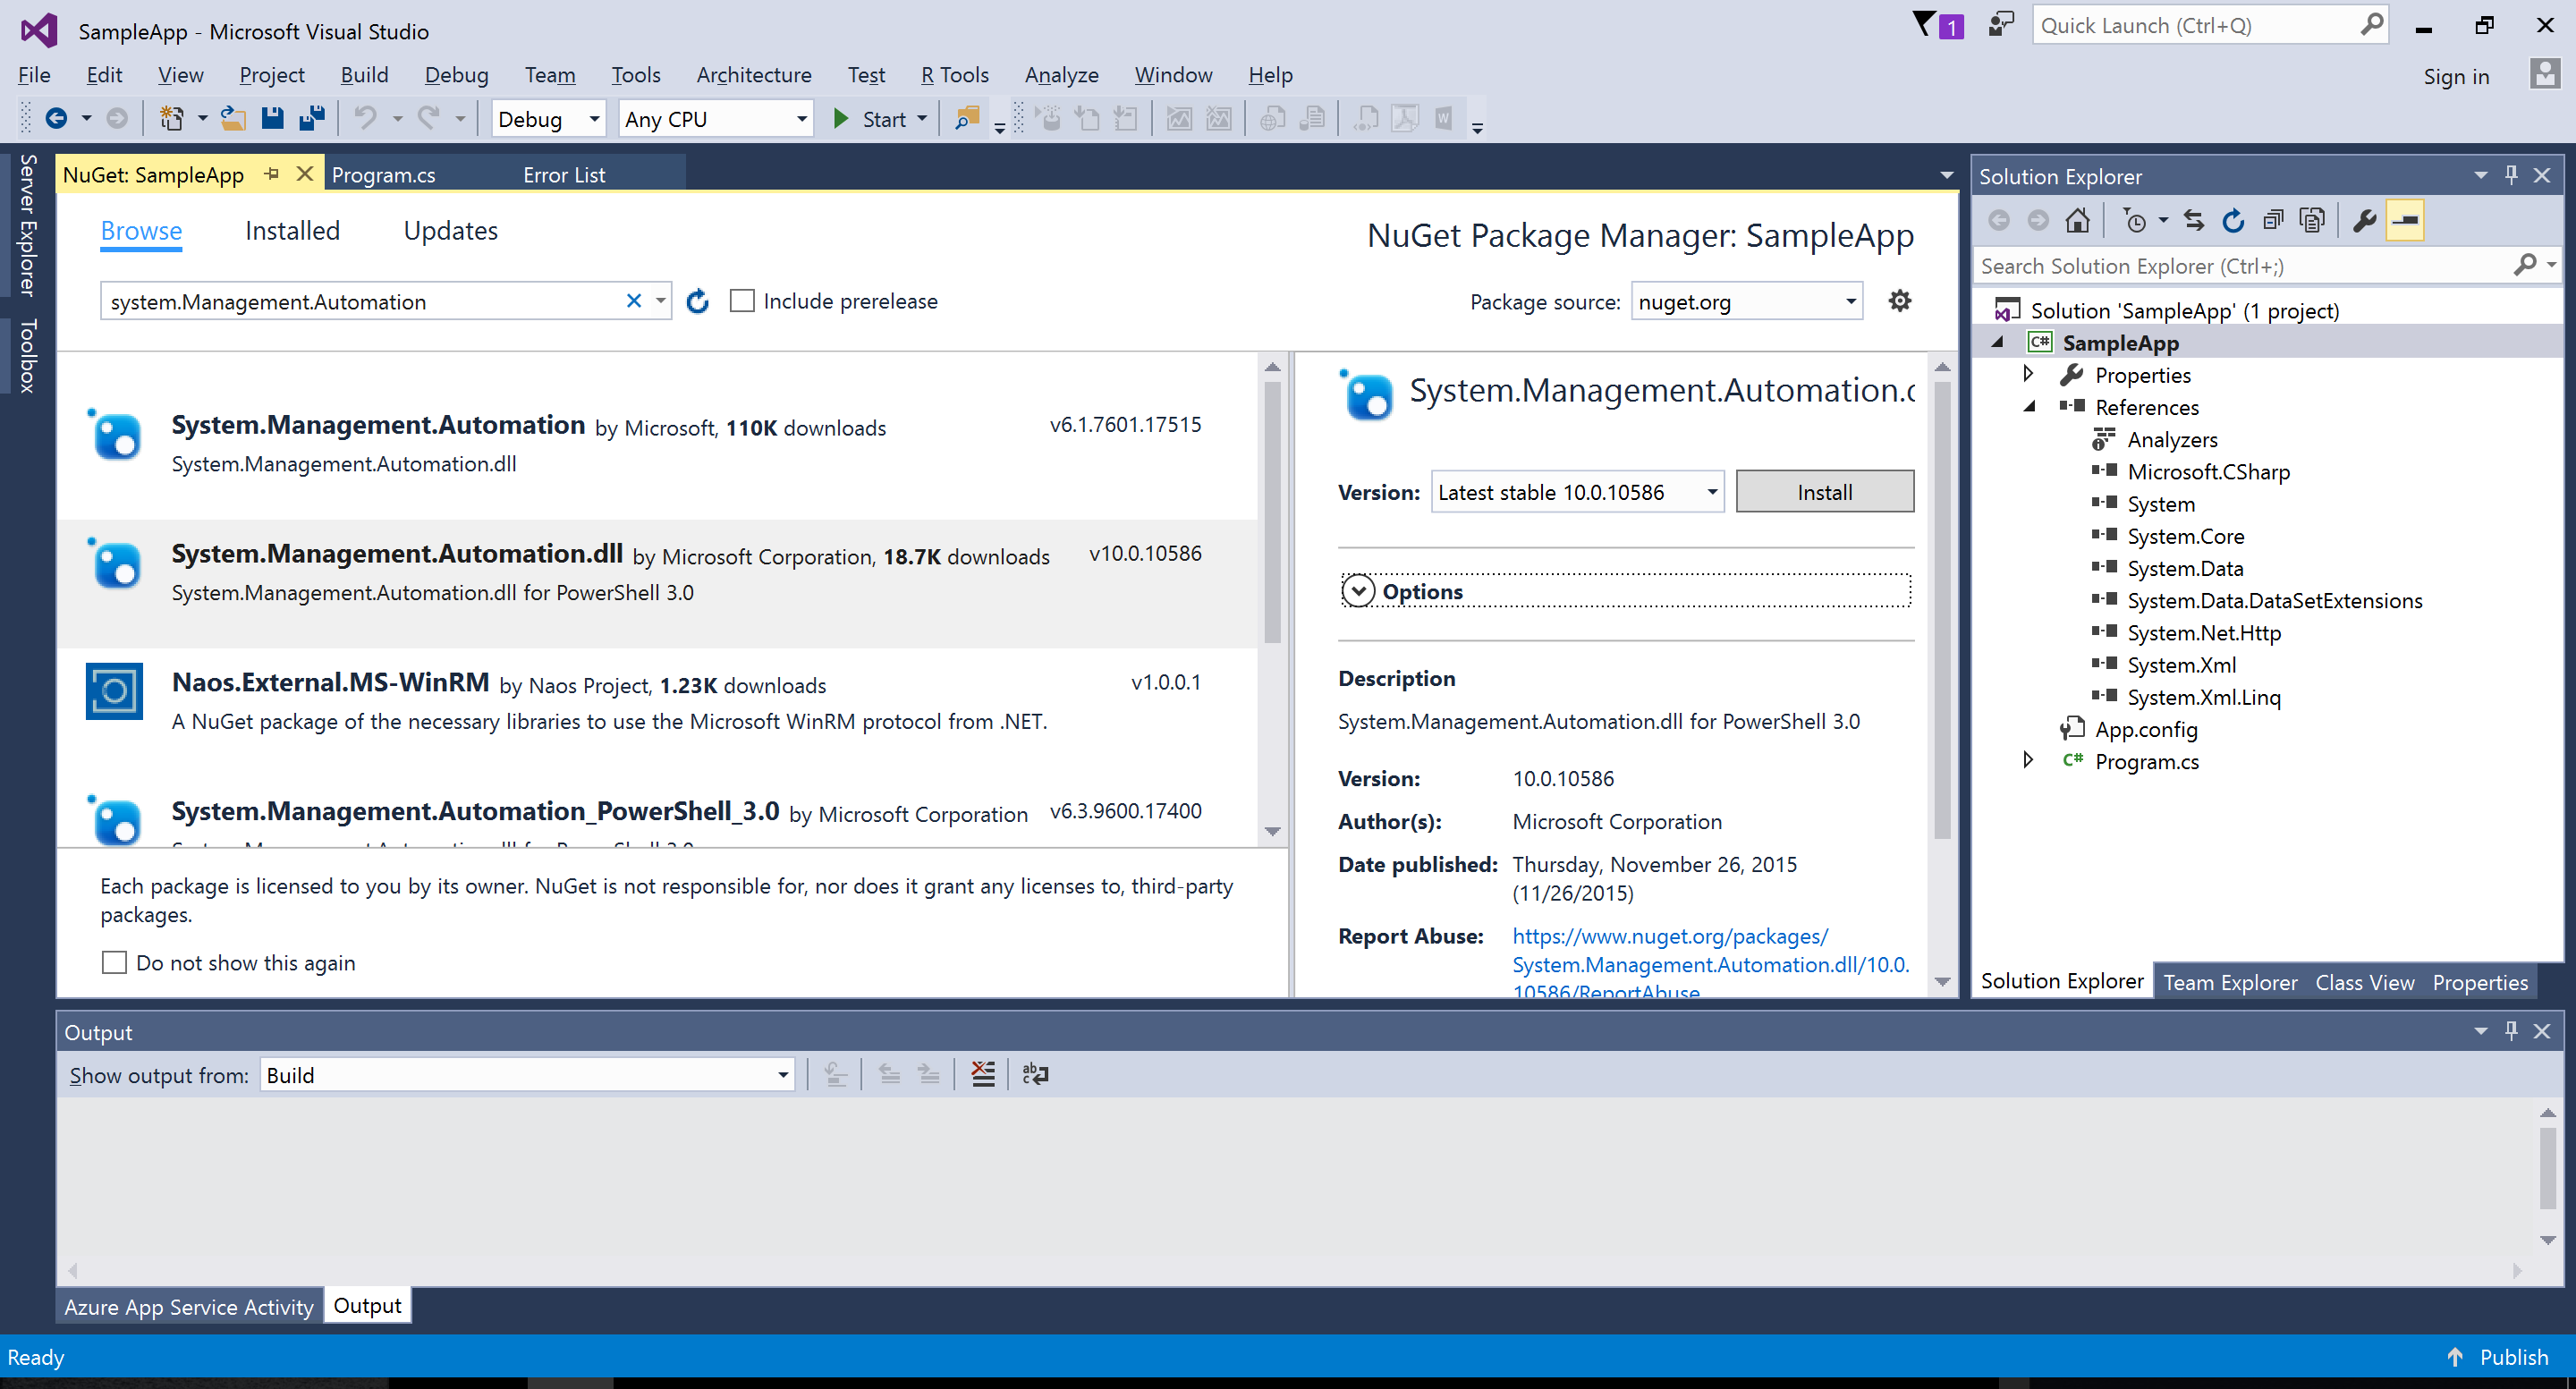 Installing Nuget package for System.Management.Automation